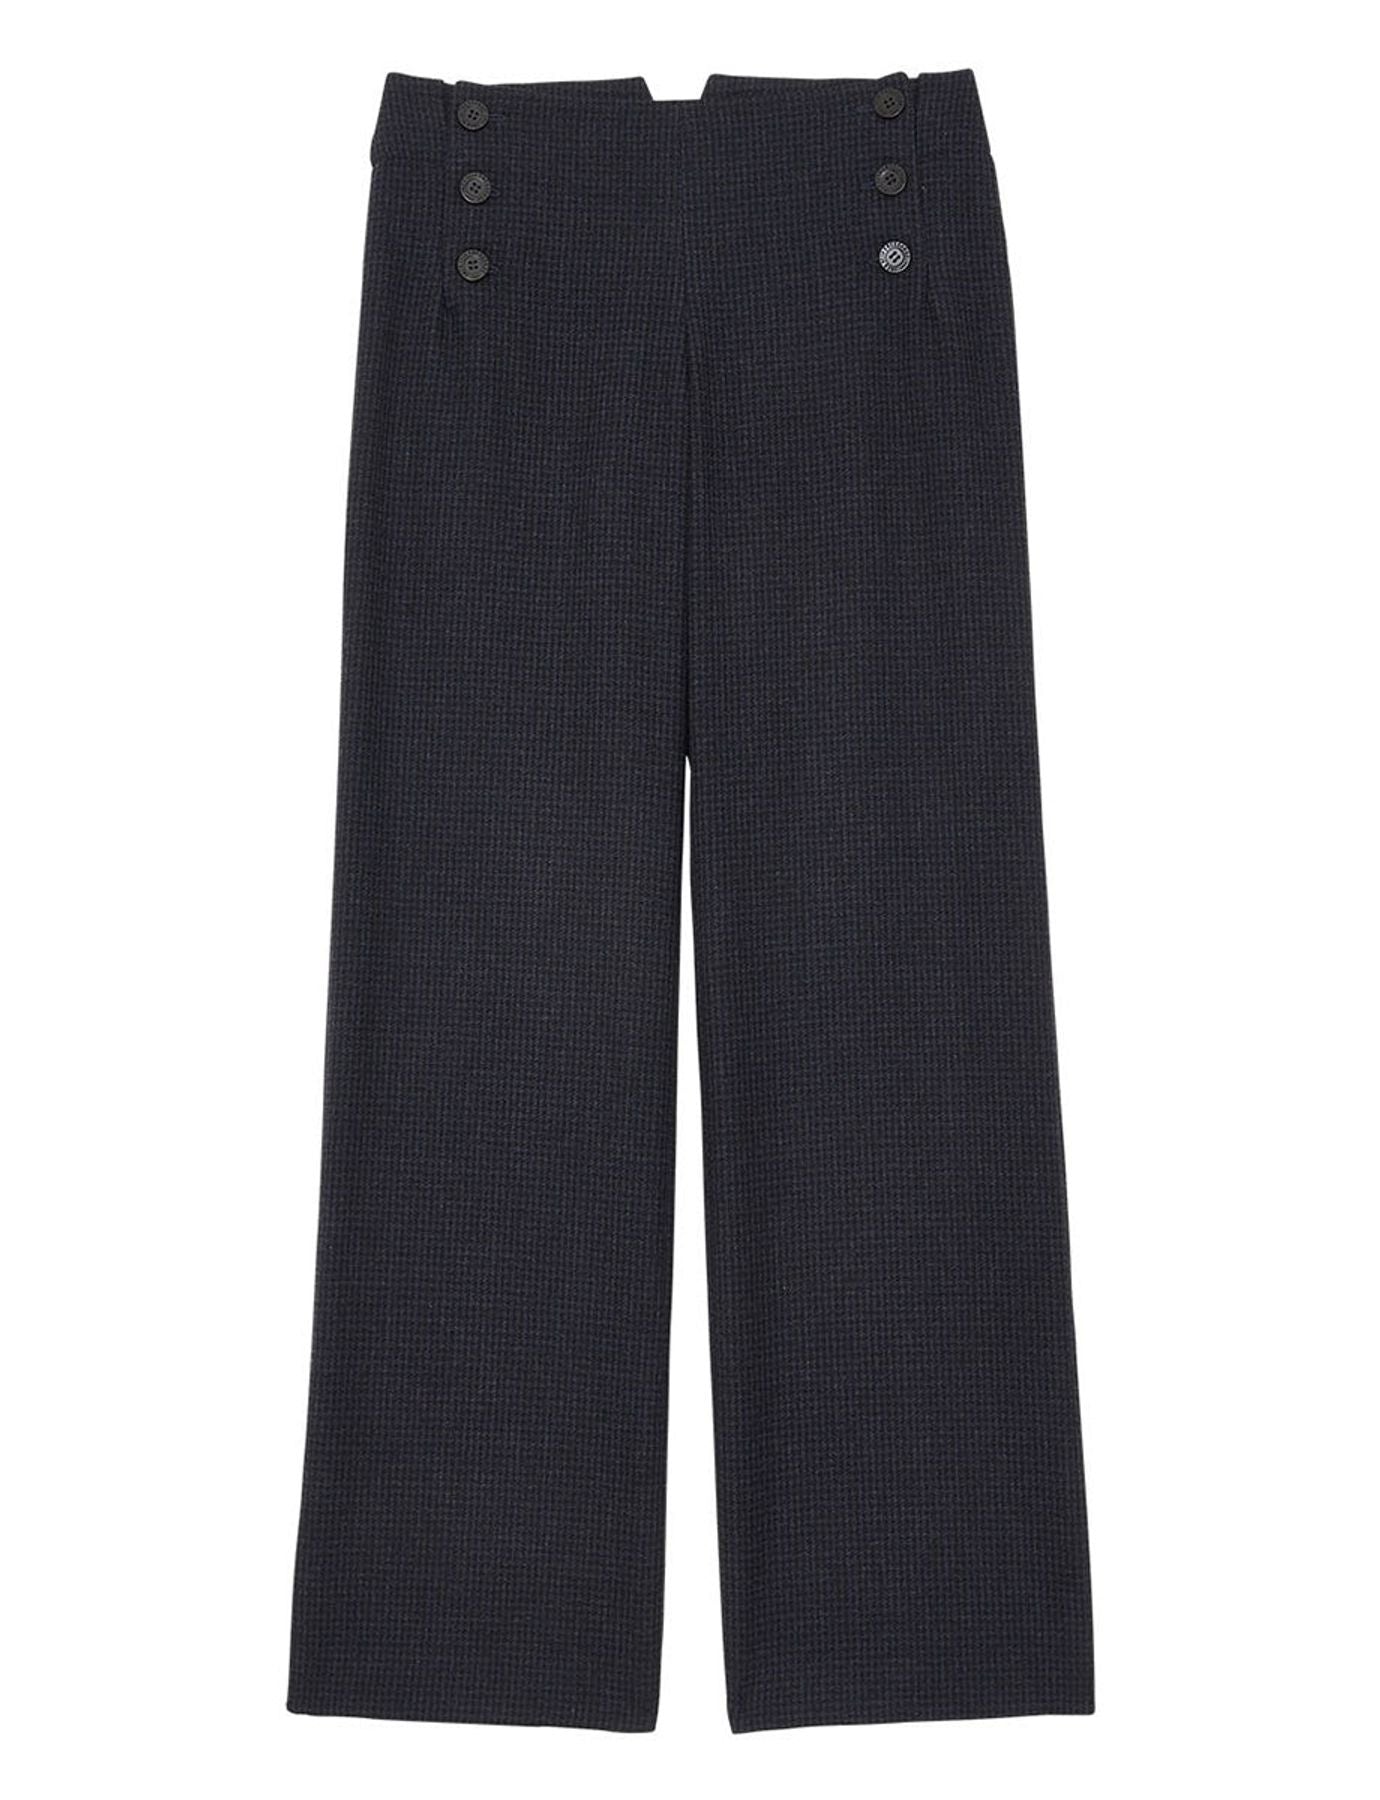 trousers-gabriel-blue-and-black